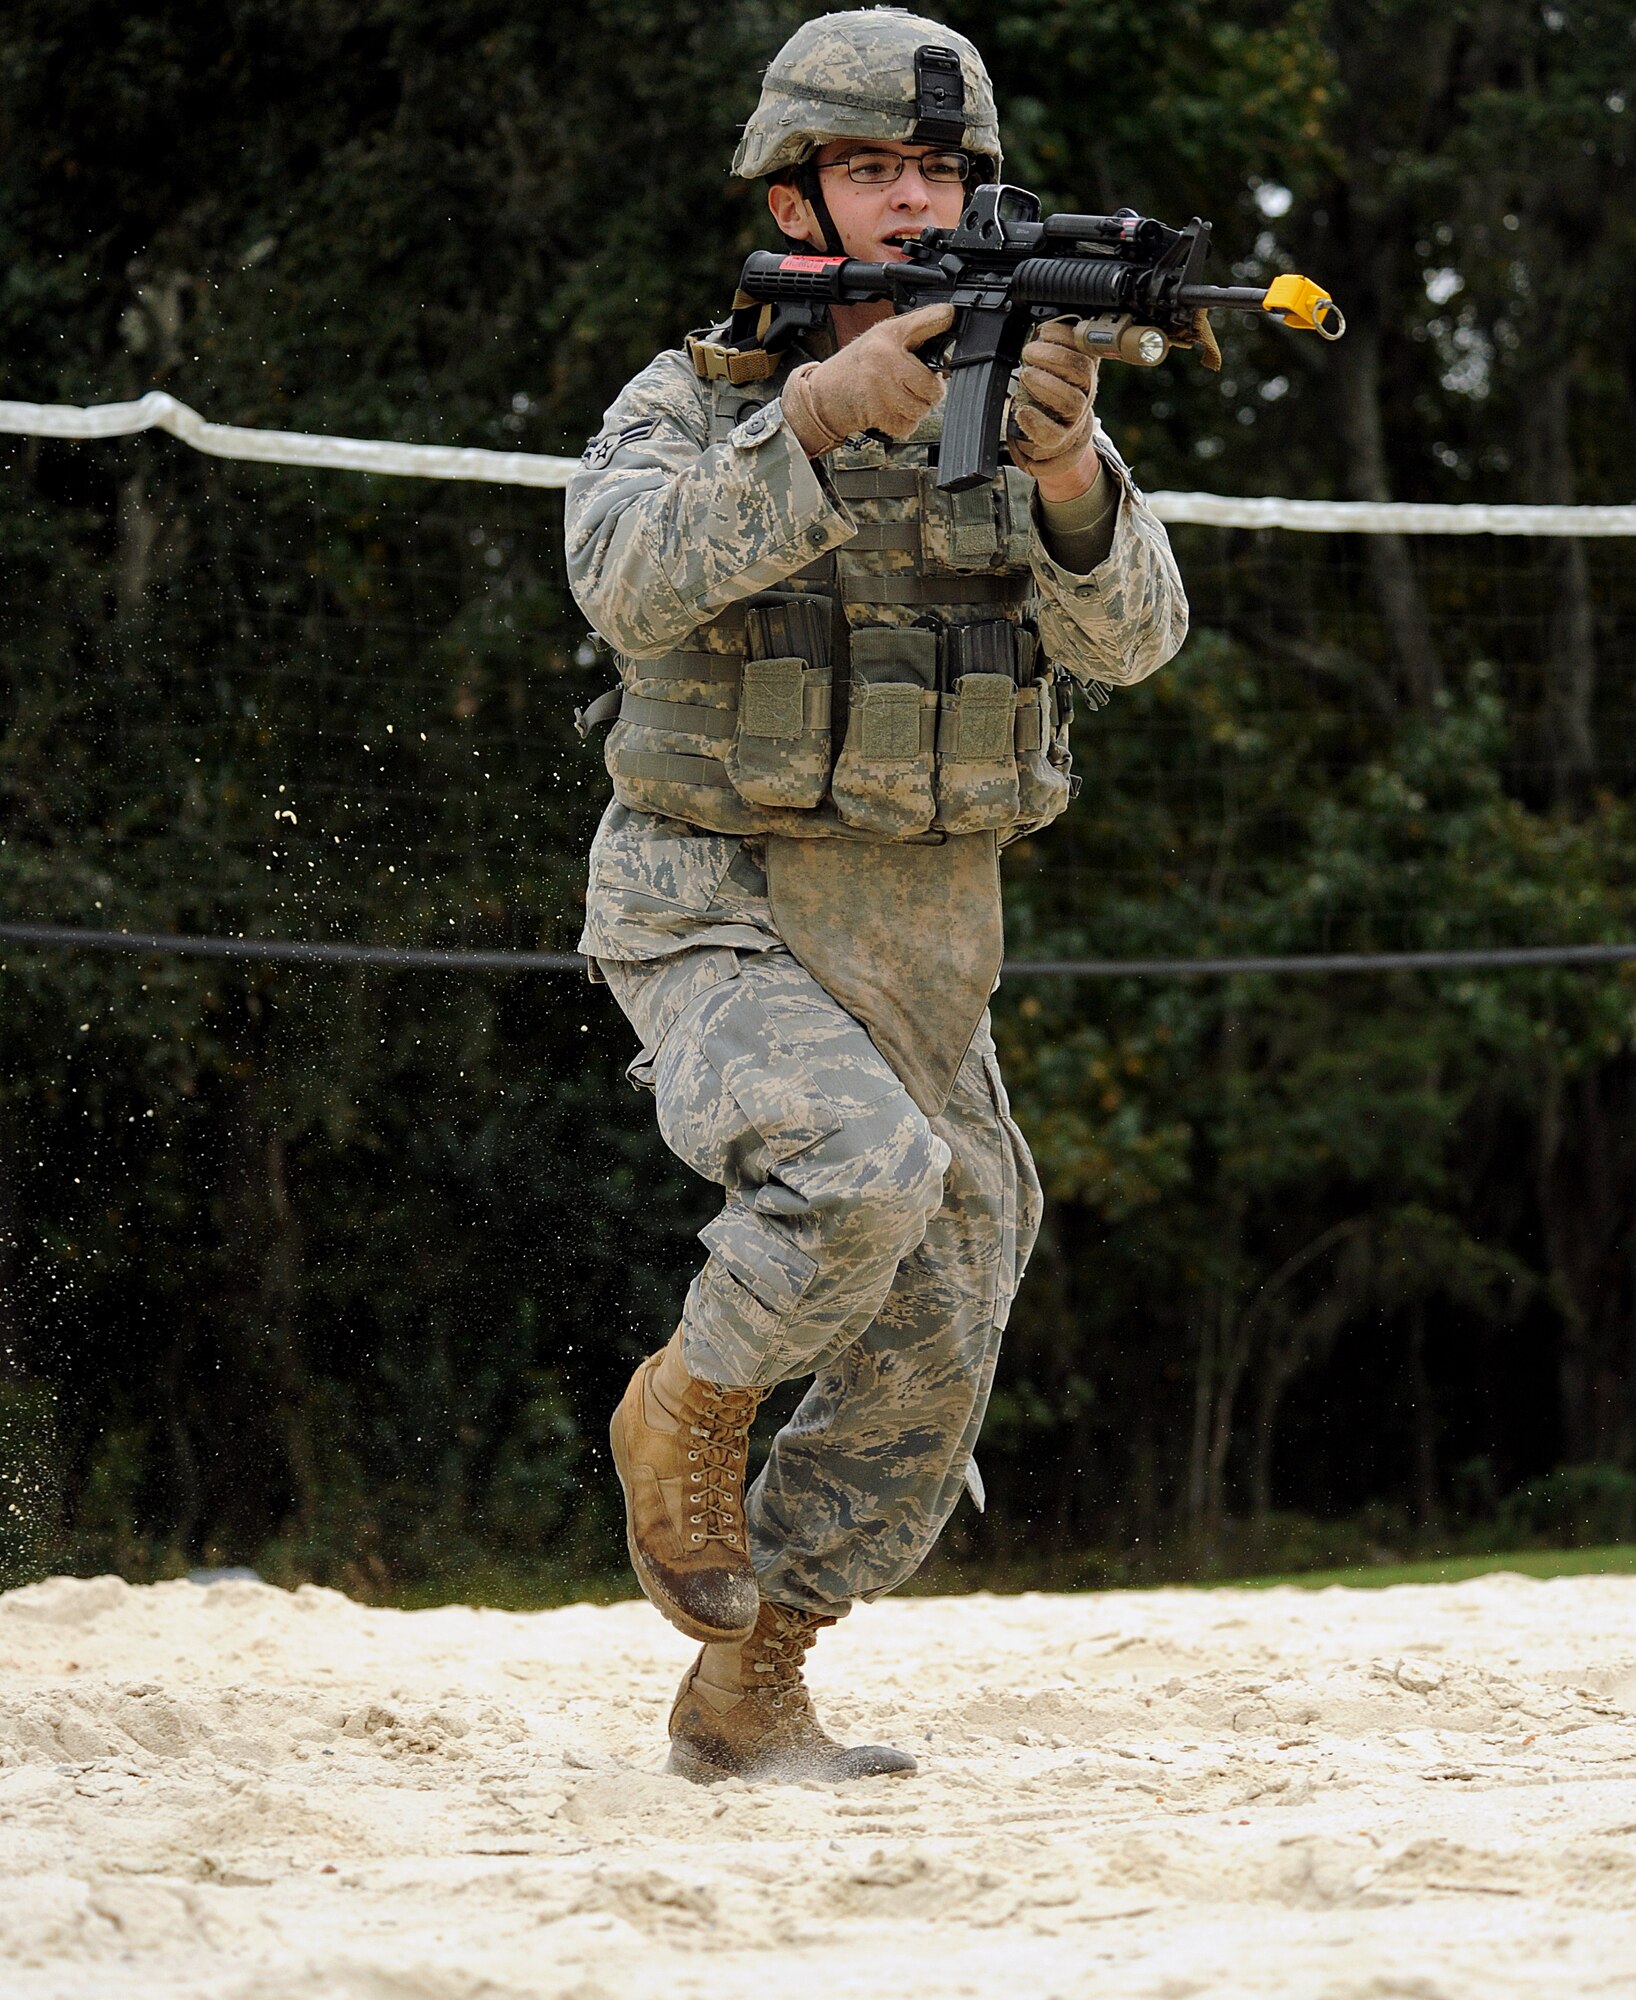 MOODY AIR FORCE BASE, Ga. -- Airmen 1st Class Joshua Hudson, 823rd Security Forces Squadron specialist, runs through an abandoned volleyball sand pit during combat maneuvers training here Nov. 2. Airmen were tasked to provide cover and suppressive fire to help their team member move to a safe position. (U.S. Air Force photo by Airman 1st Class Joshua Green) 